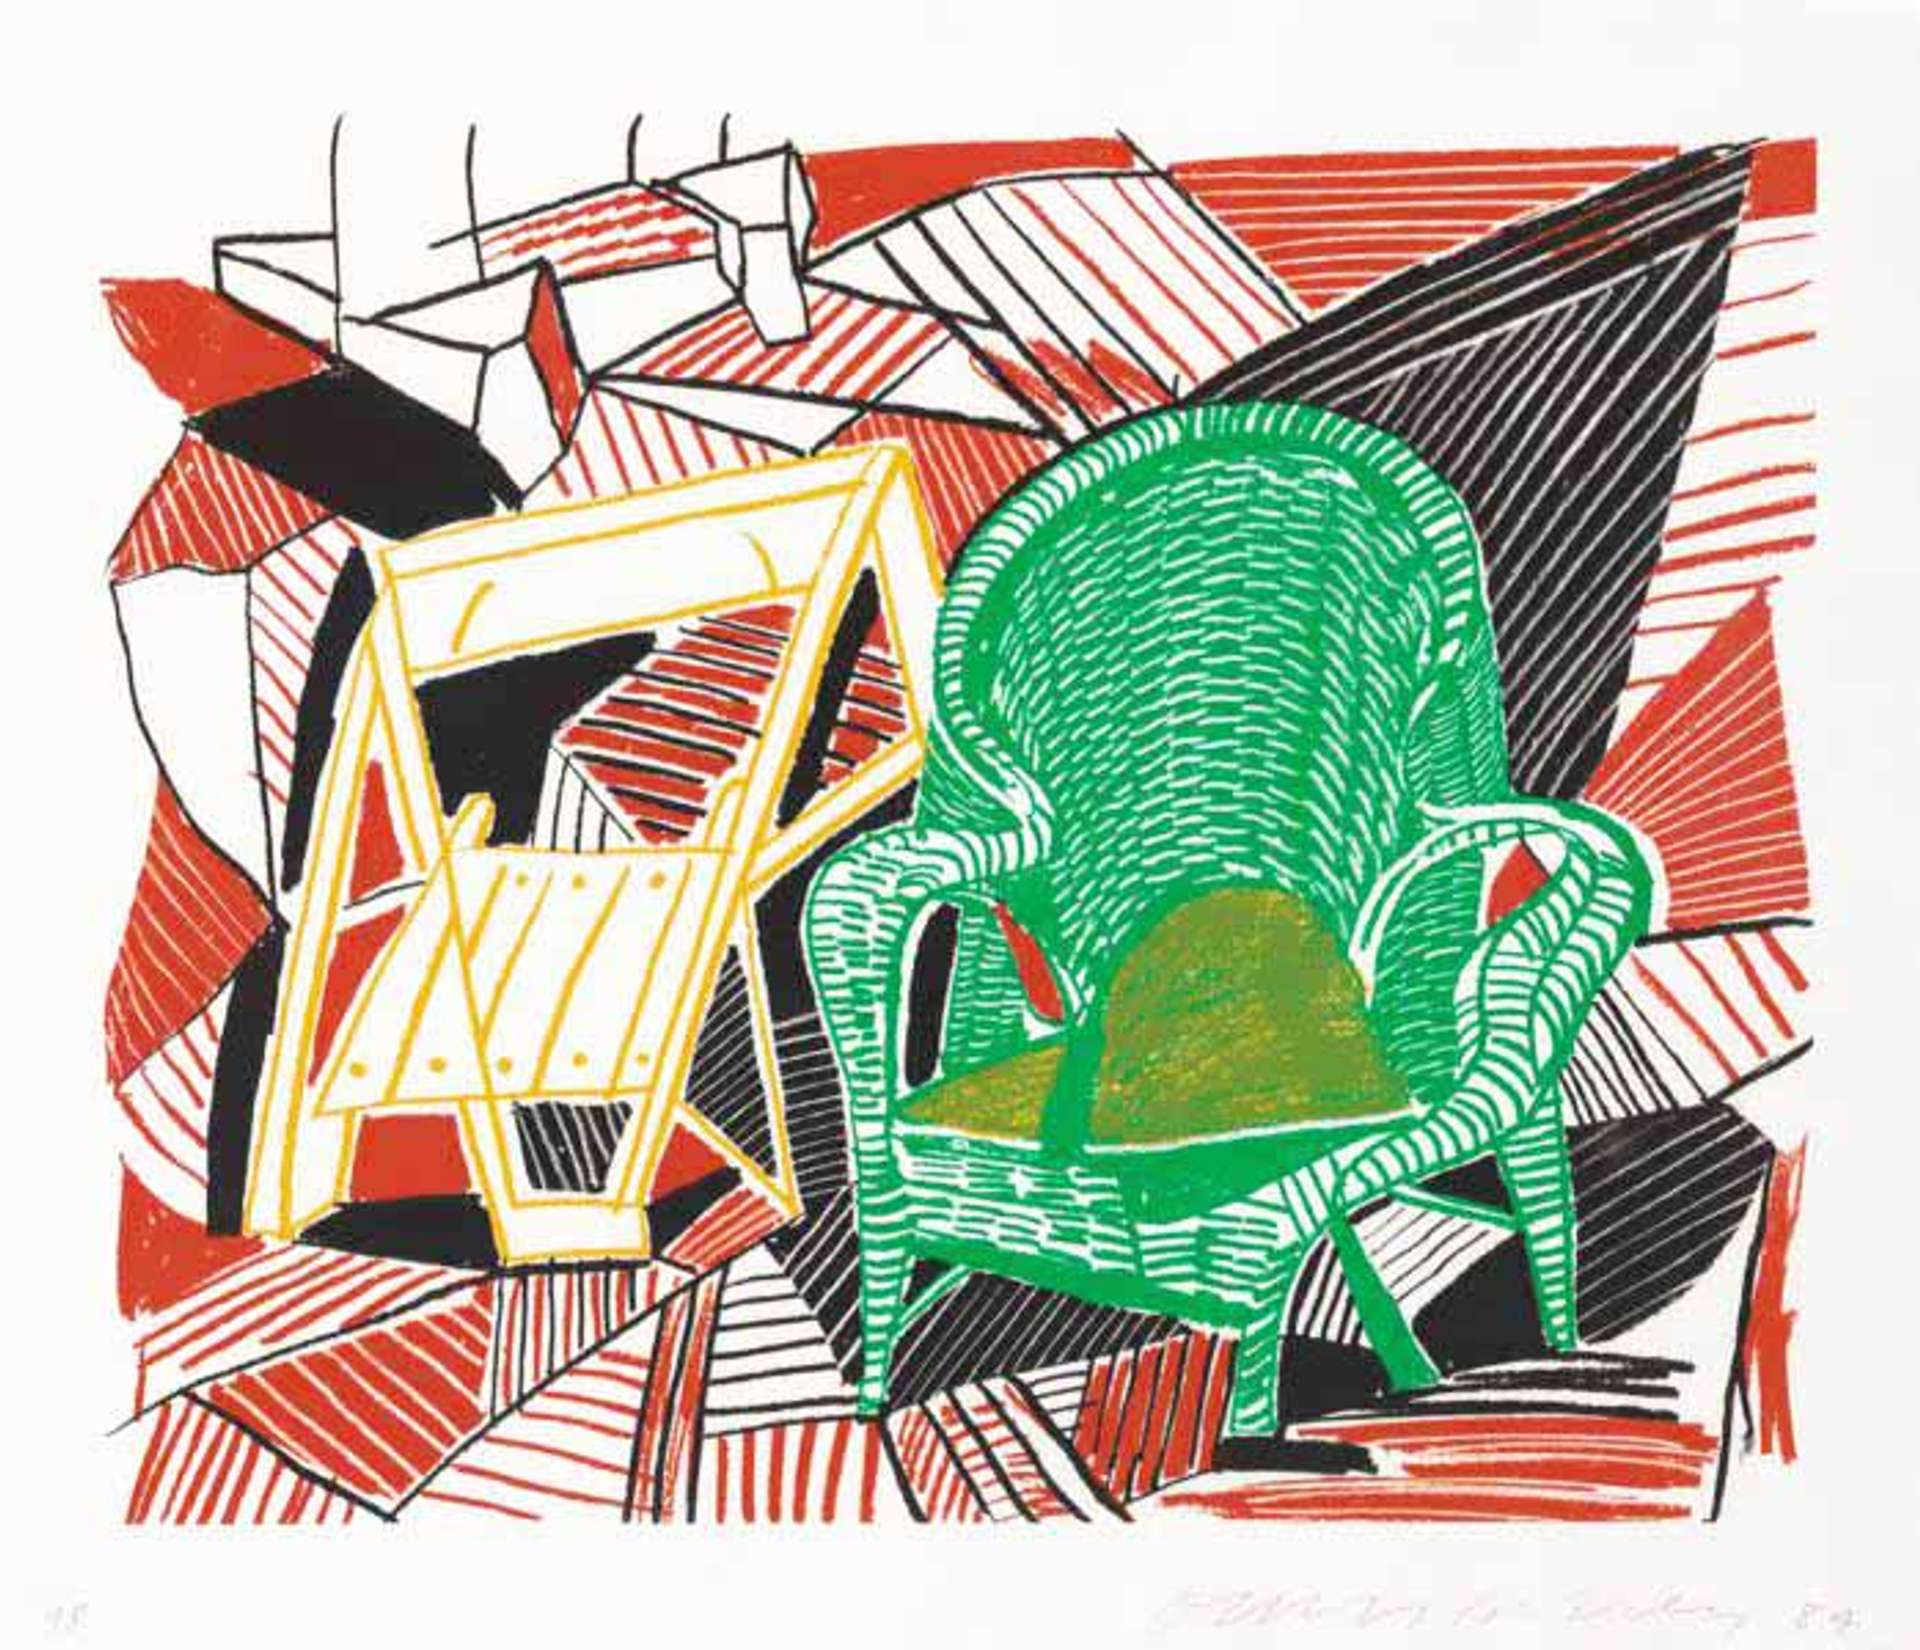 David Hockney's Two Pembroke Studio Chairs. A lithographic print of one green chair and one white chair on a black and red tiled floor. 